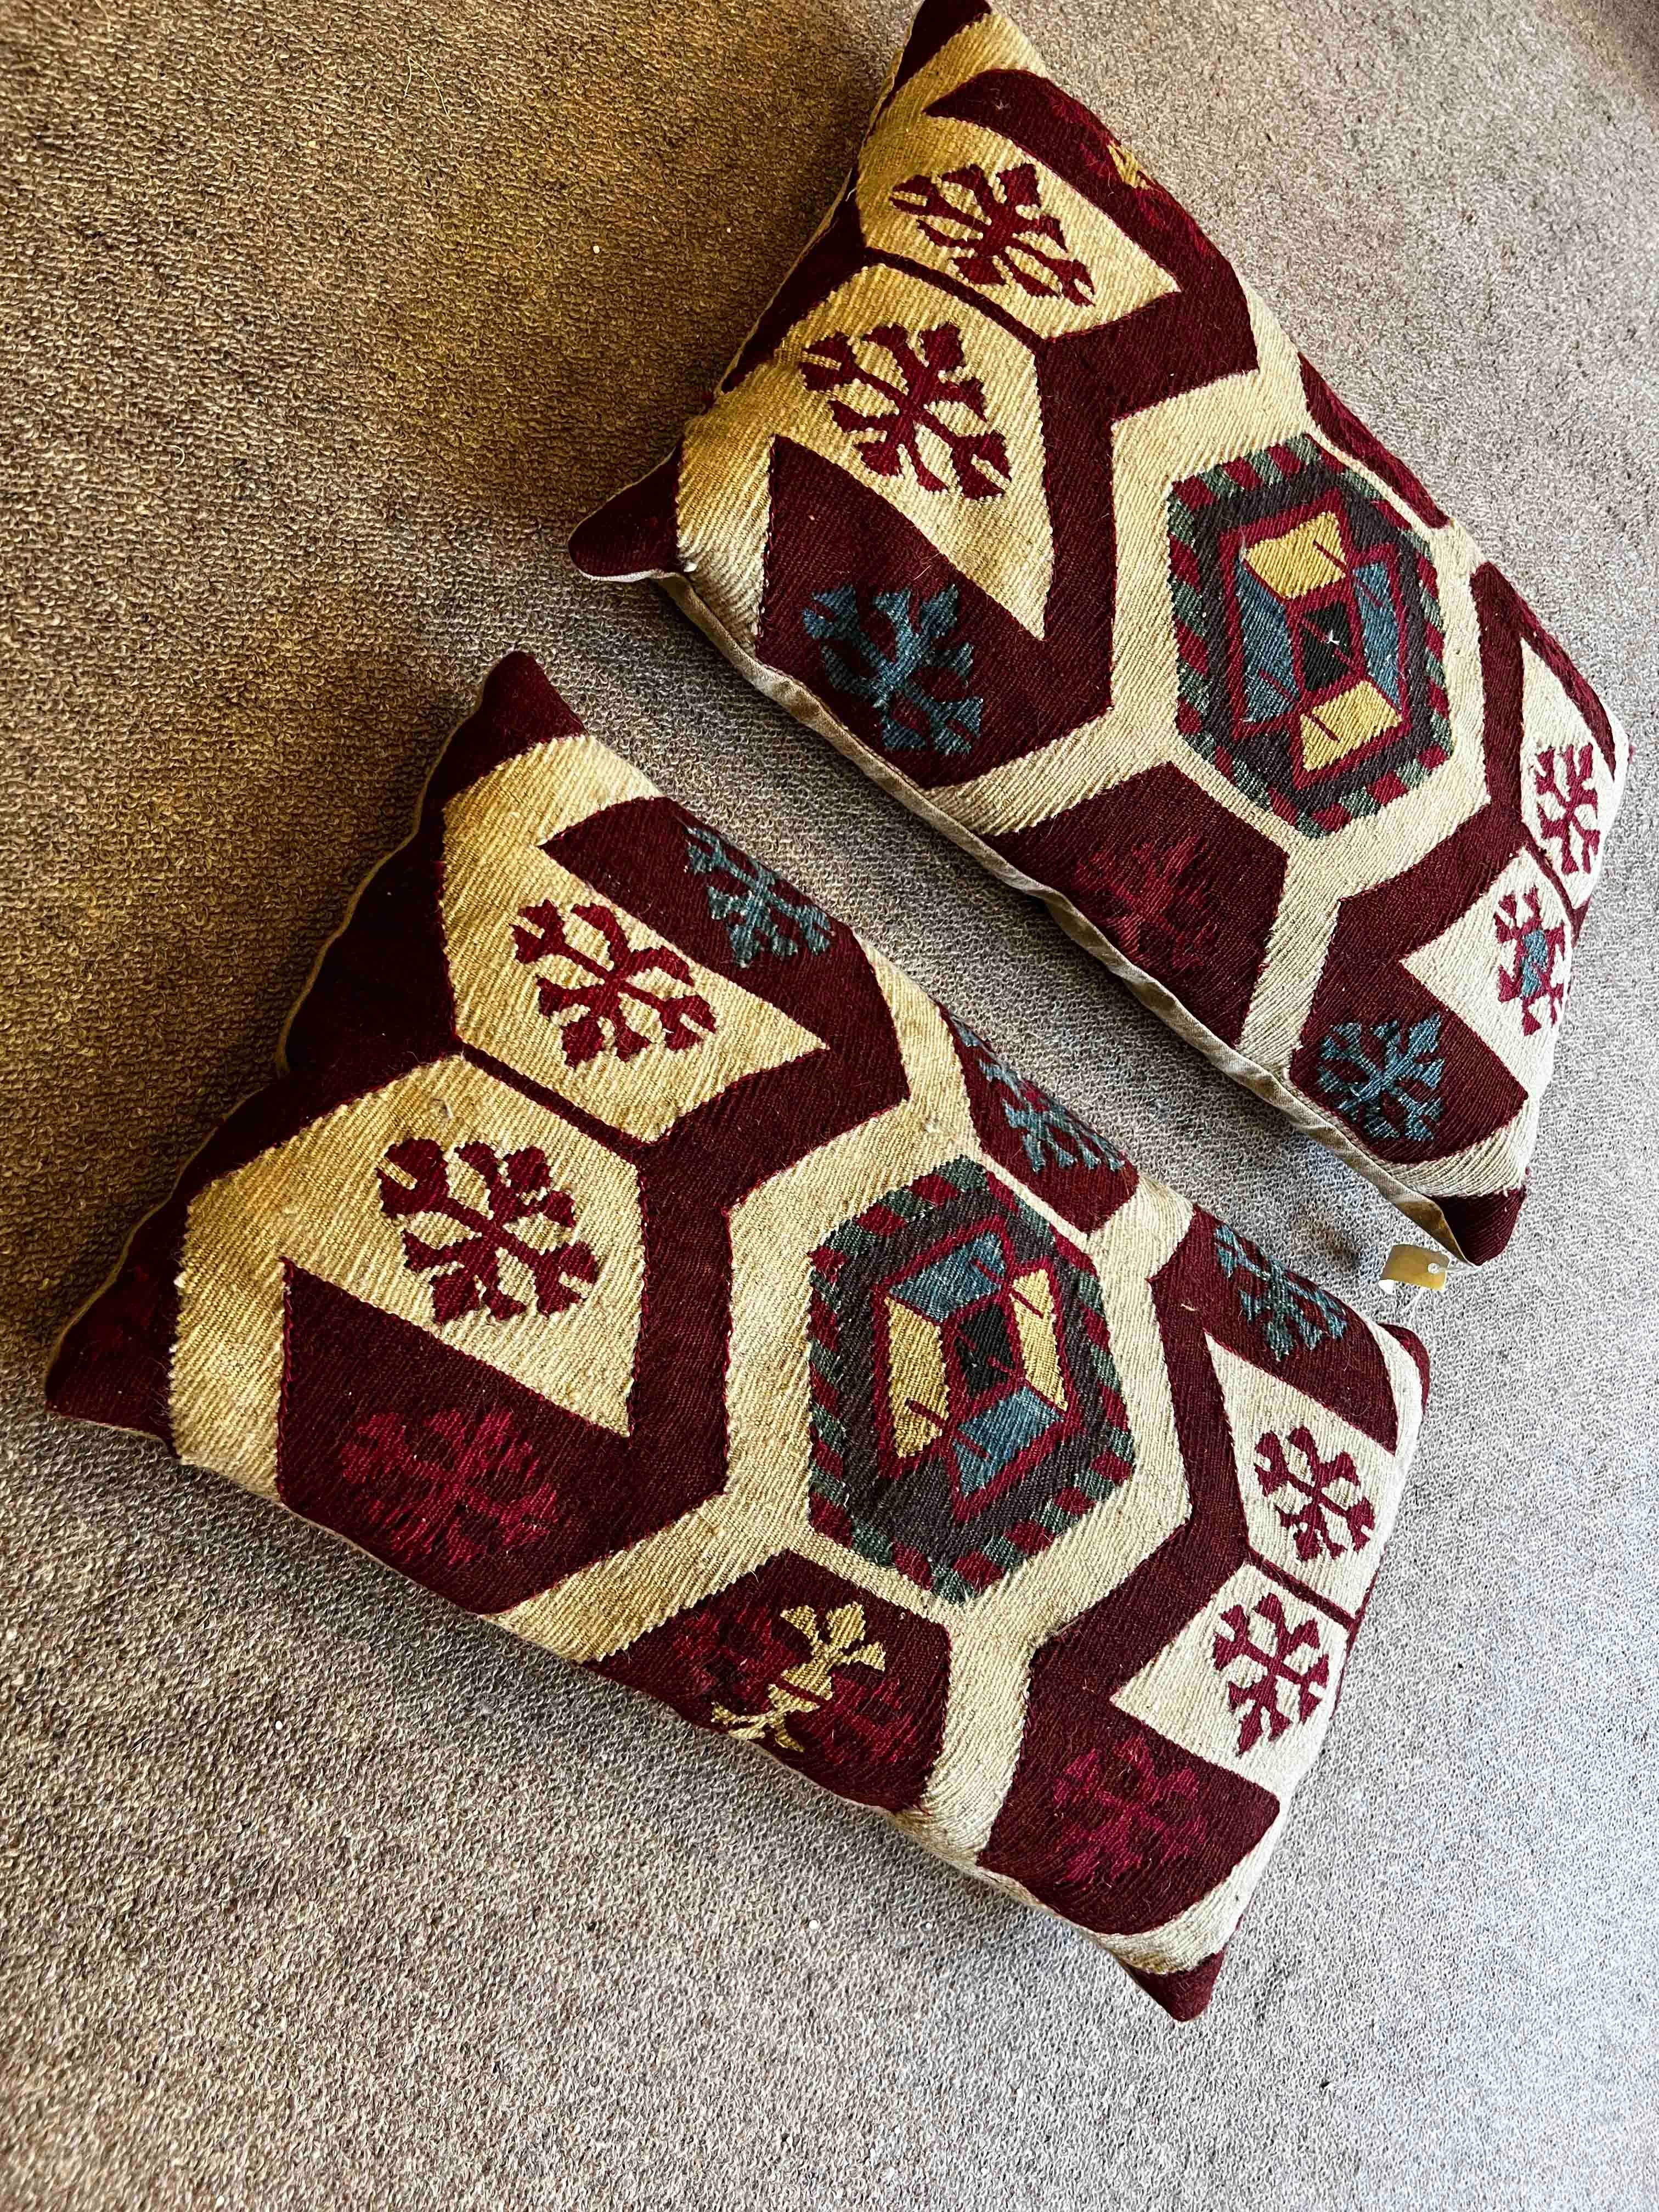 Hand-Woven Pair of Antique Kilim Cushions Handmade Around 1940 - N° 305 For Sale